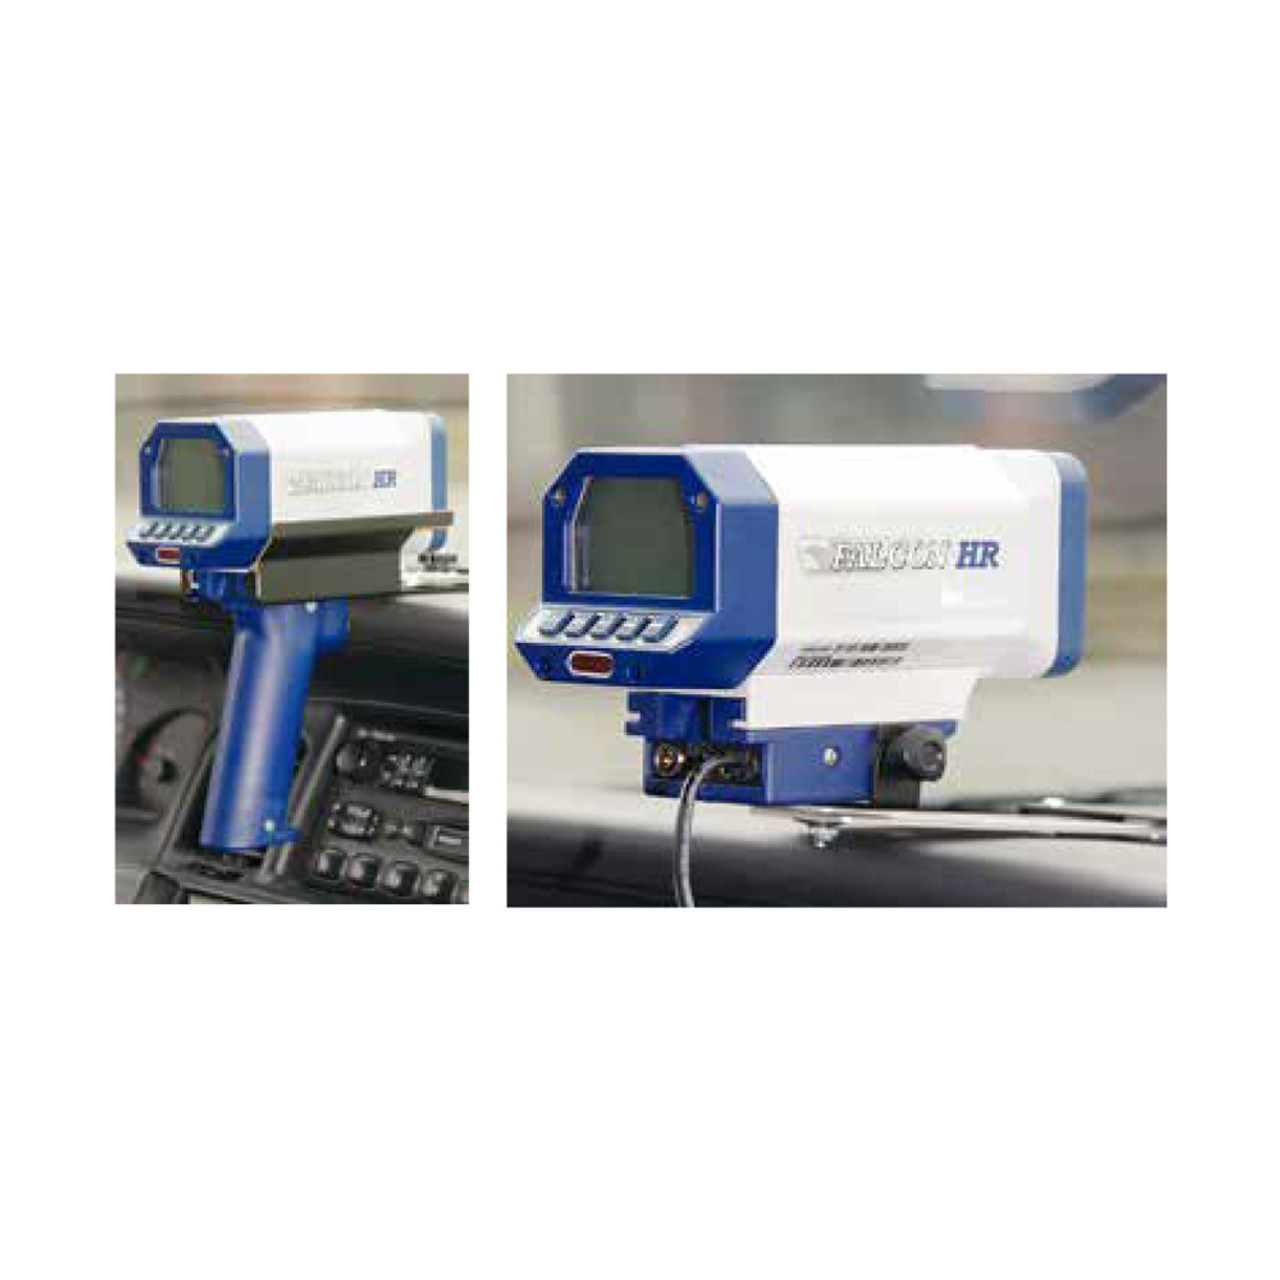 Kustom Signals Video Interface port/cable to connect with video system for Talon II or Falcon HR Radar, Accessory